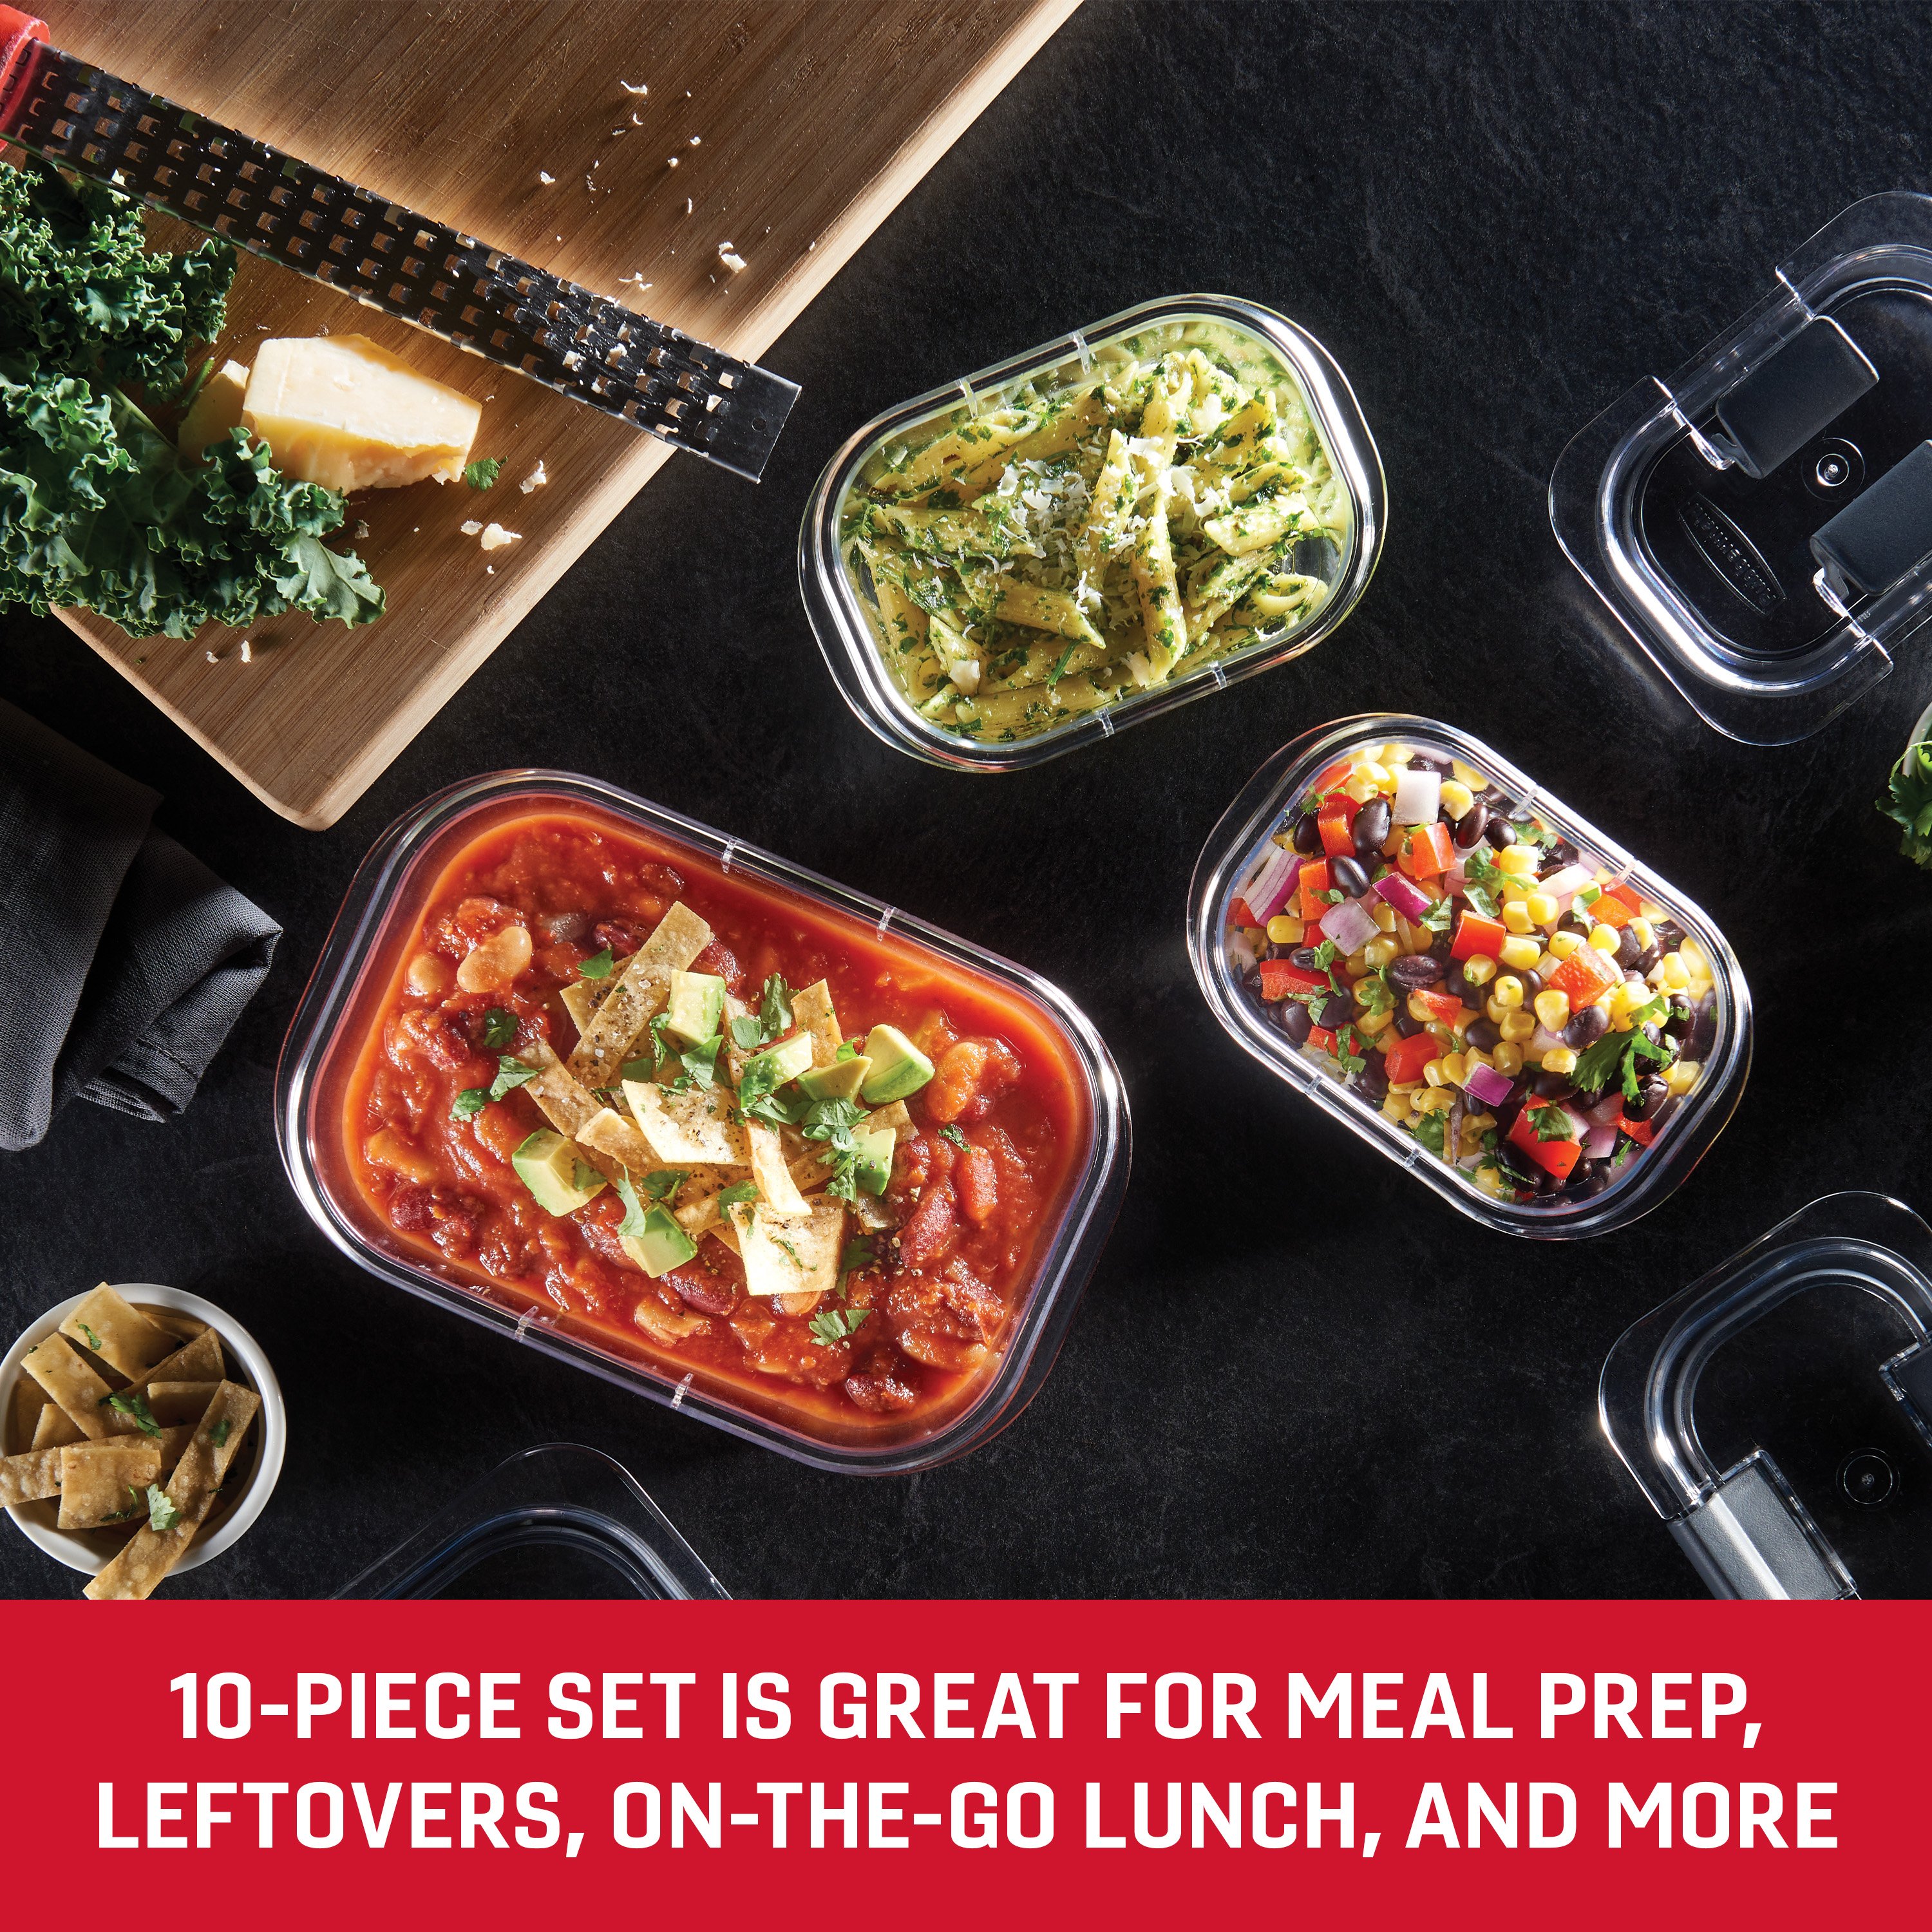 Rubbermaid Brilliance BPA Free Food Storage Containers with Lids, Airtight,  for Lunch, Meal Prep, and Leftovers, Set of 5 (3.2 Cup) 